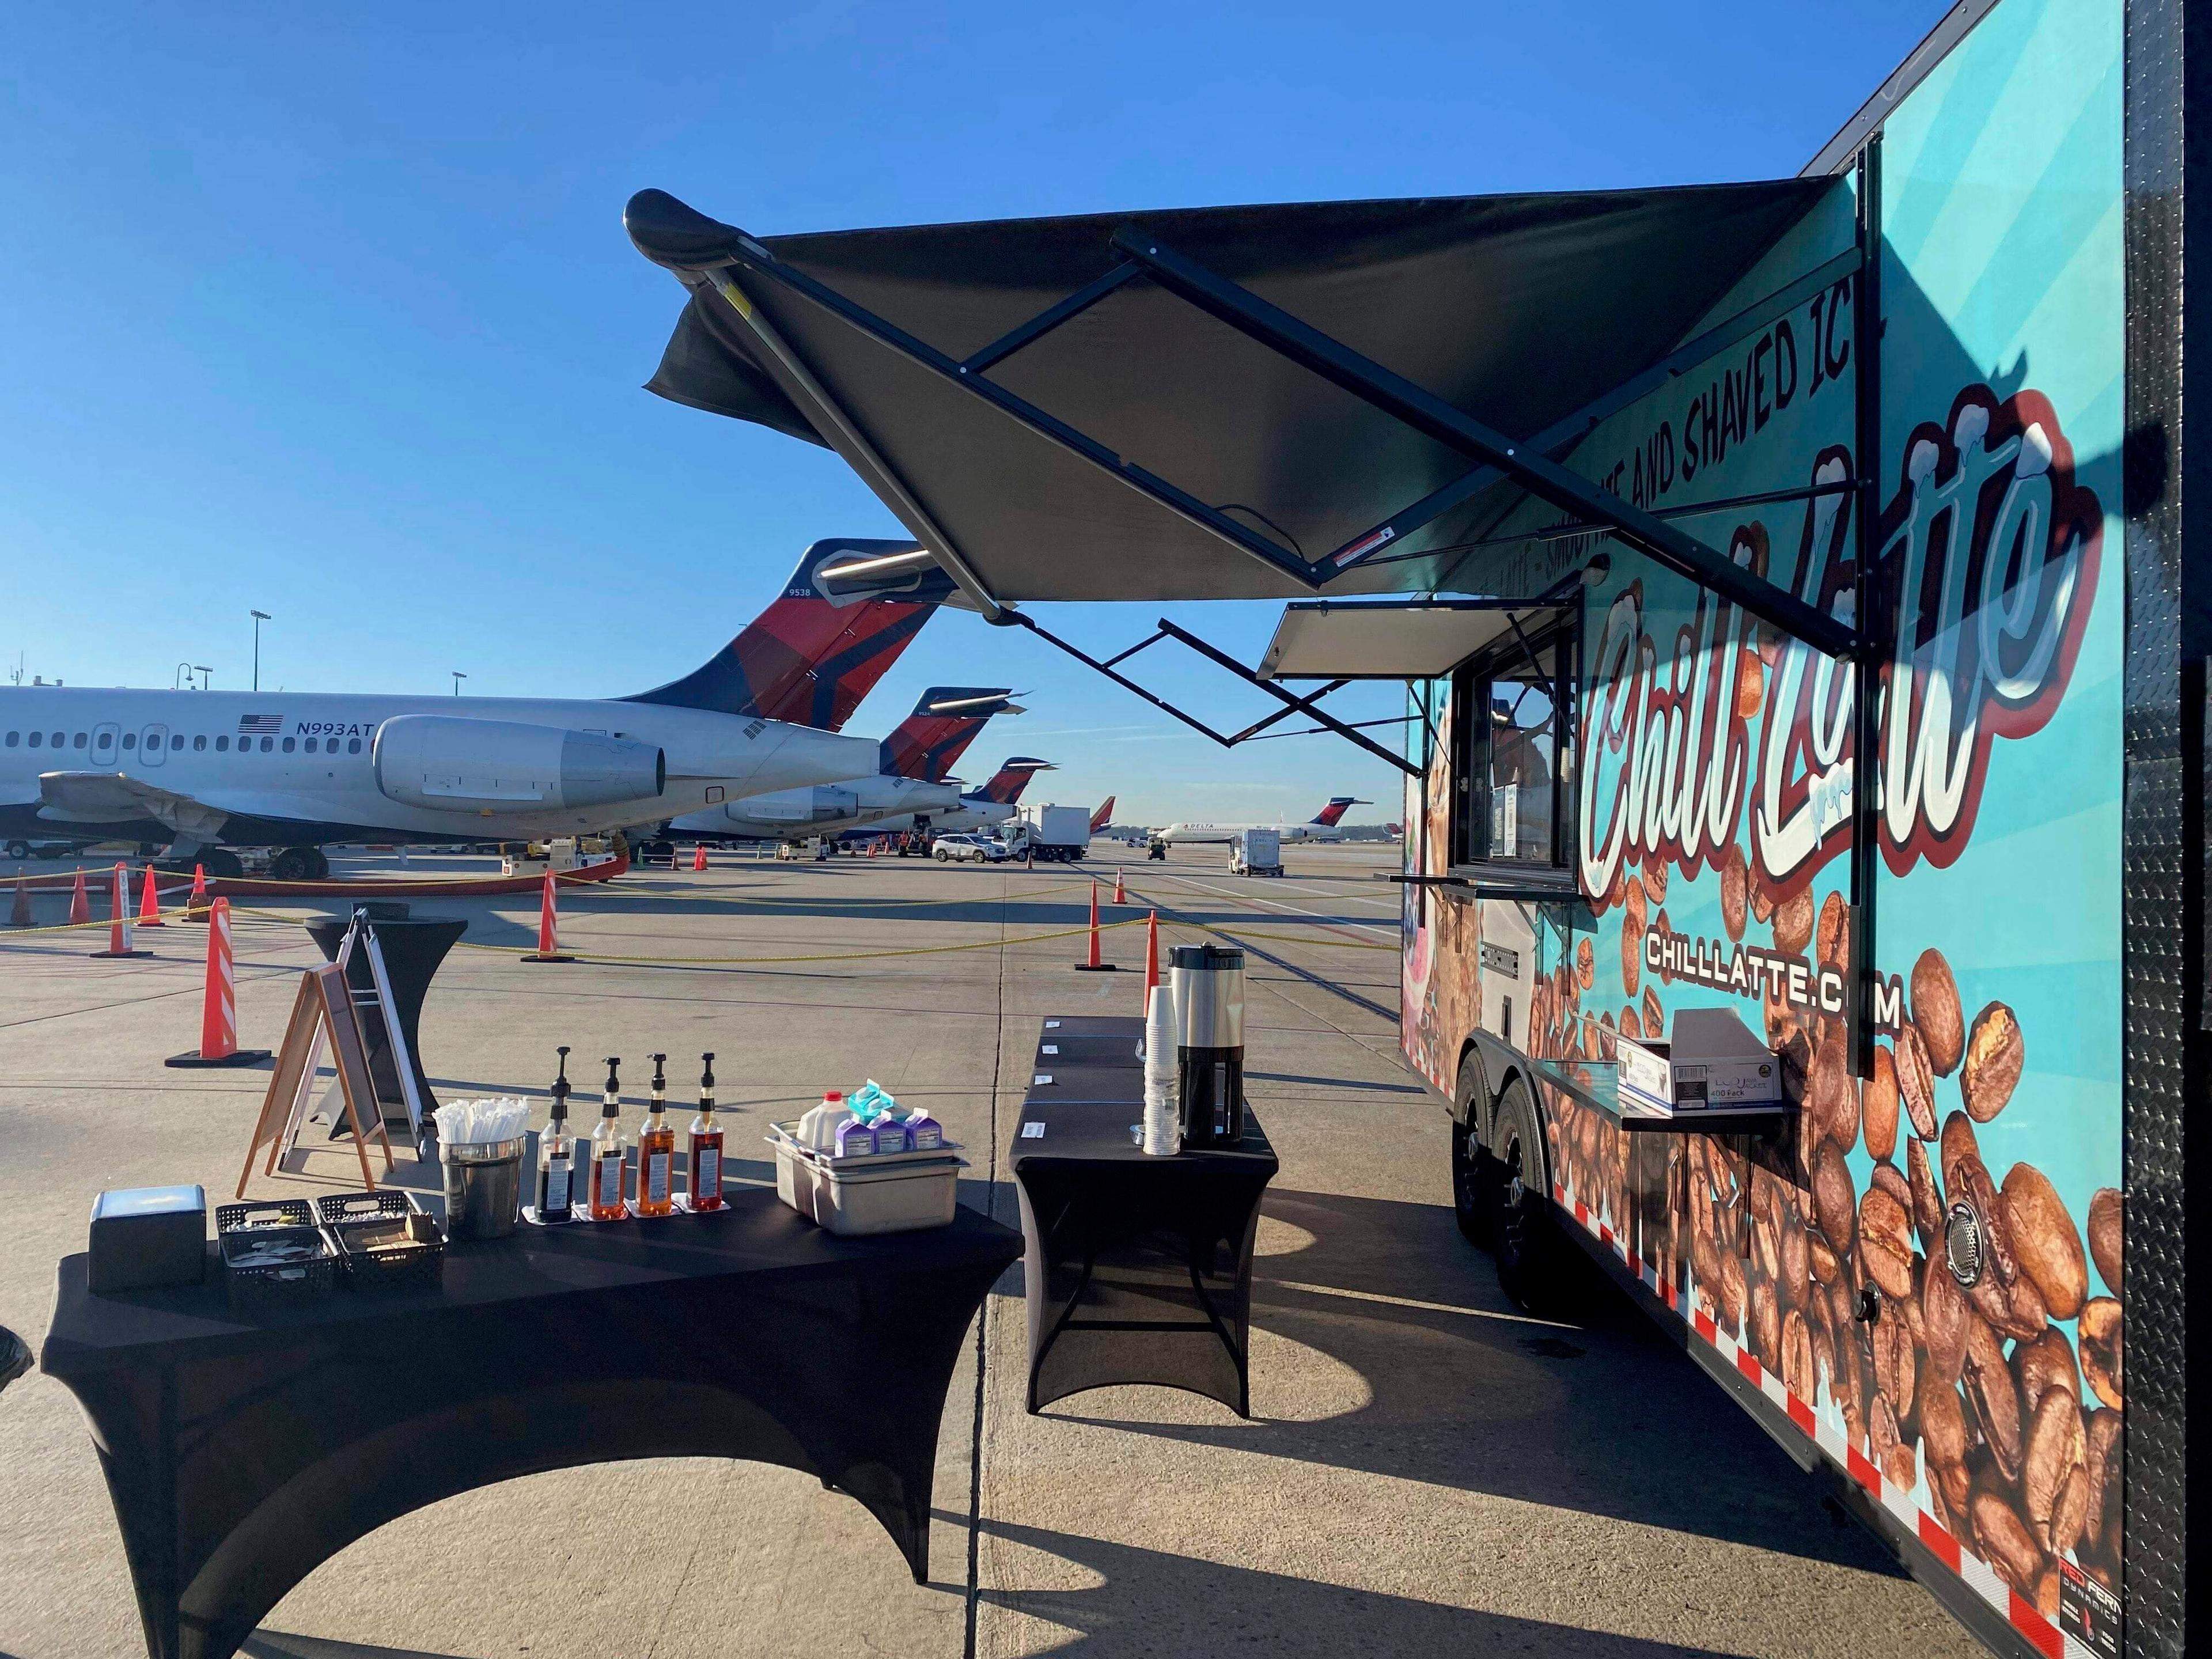 Chill Latte trailer serving smoothies at the Hartsfield–Jackson Atlanta International Airport Delta employees  